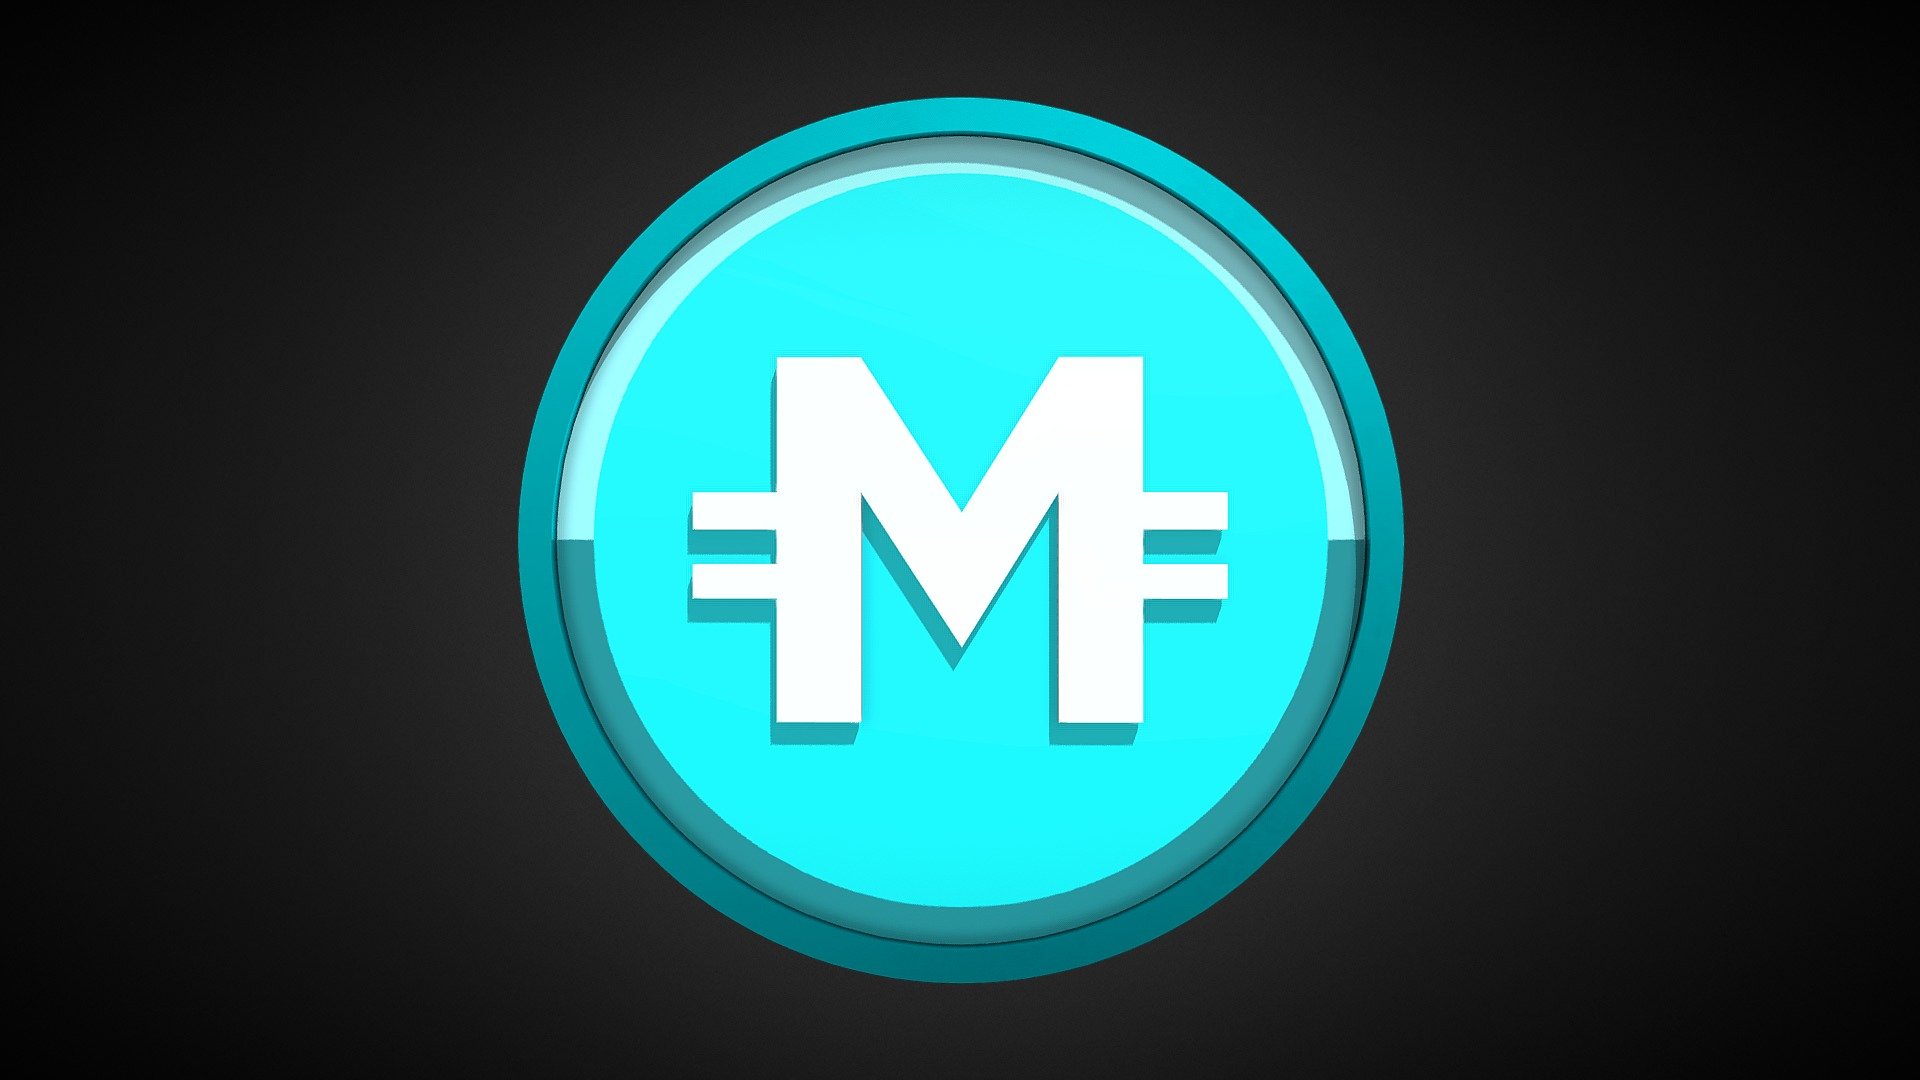 The Mosscoin cryptocurrency logo made into a 3D coin / token.


Blender file and textures folder is included.
FBX file has textures embedded.

The textures are Matte Plastic Aqua (3 shades). Glossy Plastic White, and Aluminum Dark Aqua 3d model